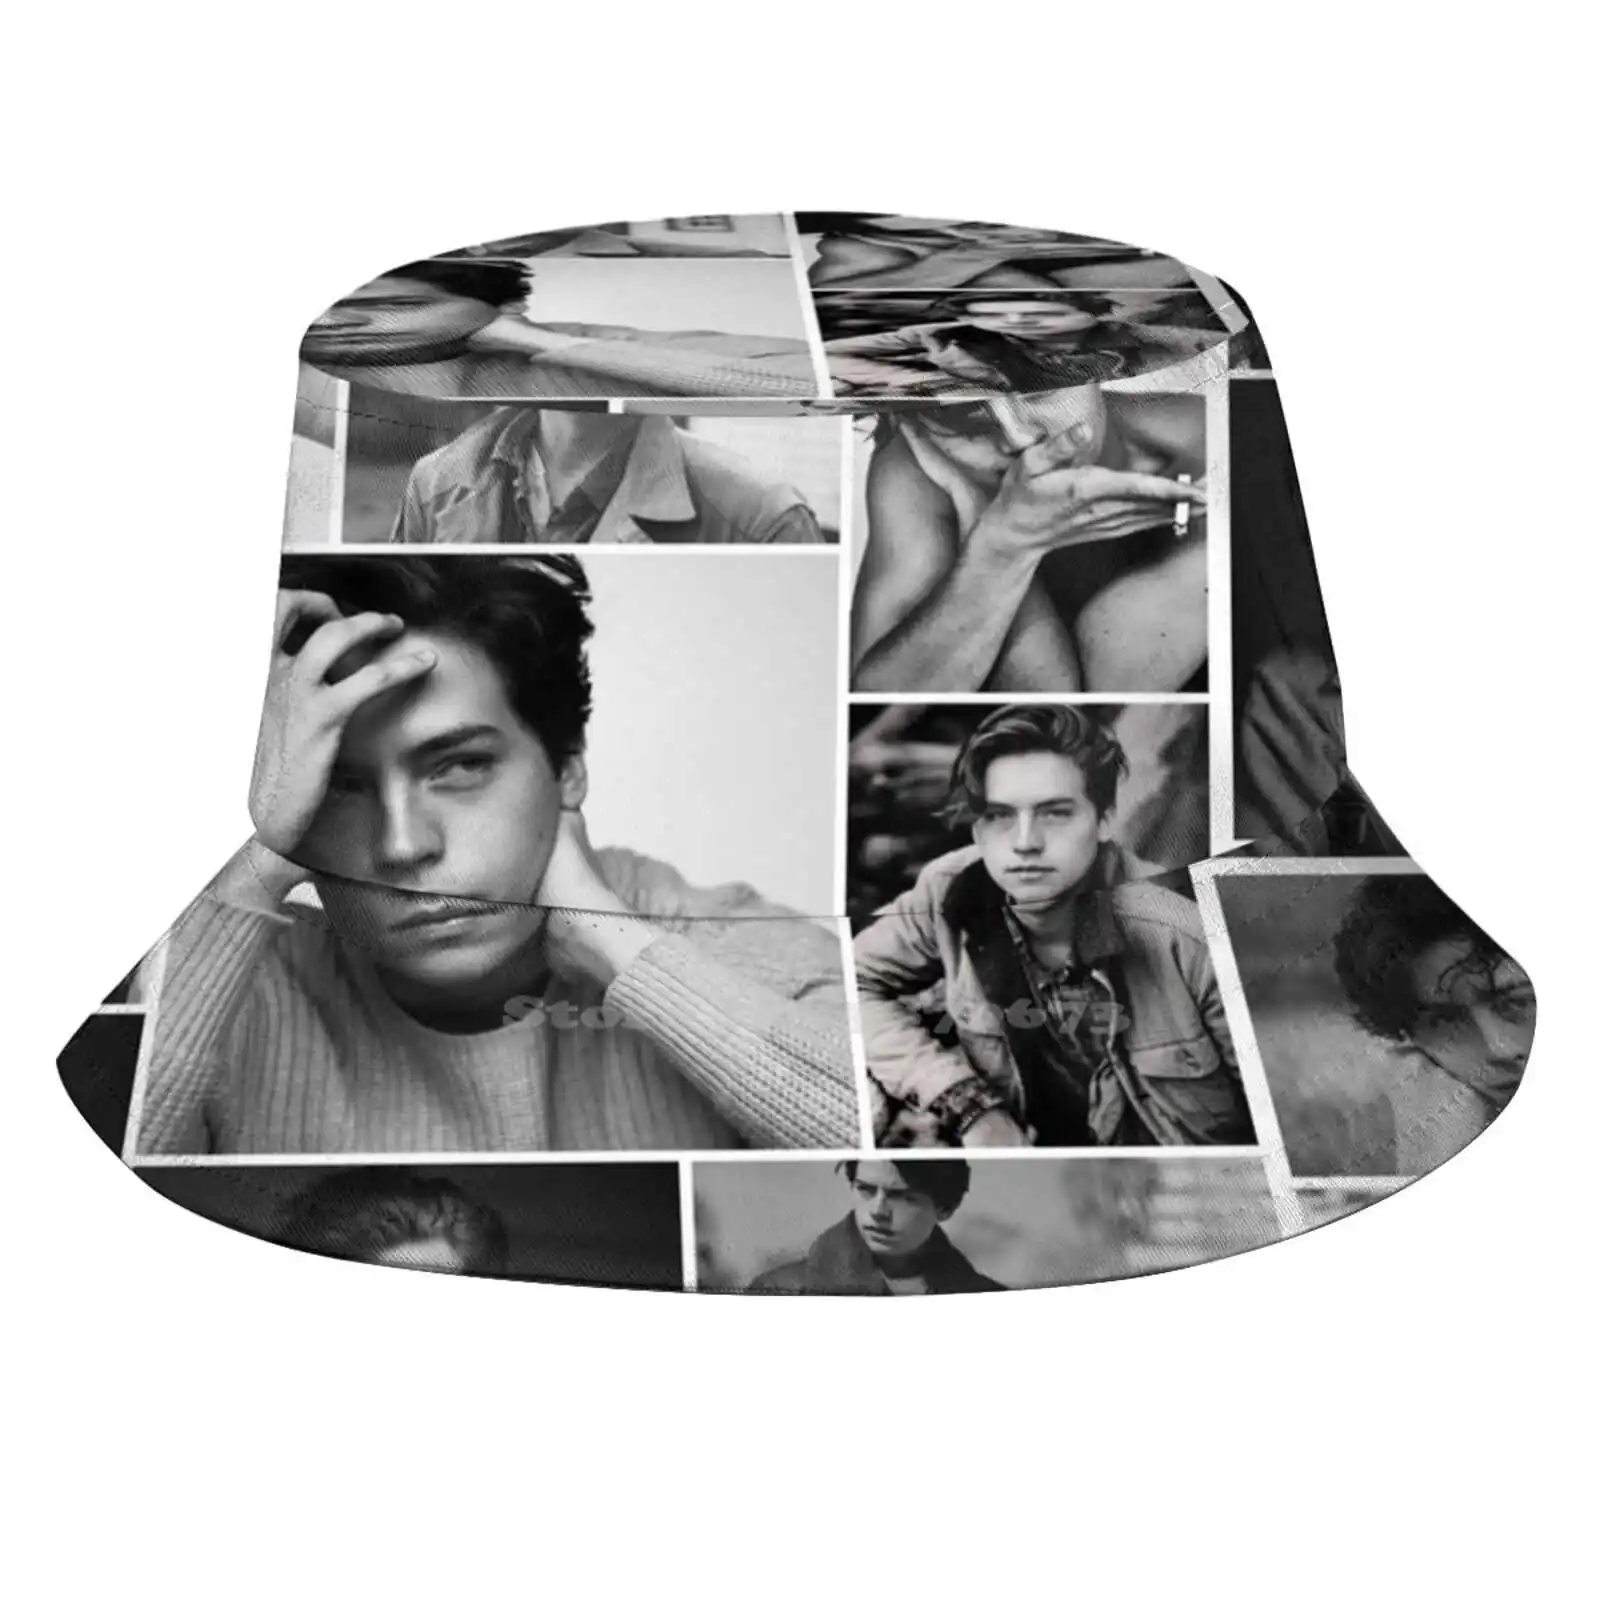 

Cole Sprouse Black And White Women Men Fisherman Hats Bucket Caps Riverdale Tvshow Southside Serpents Black And White Tumblr